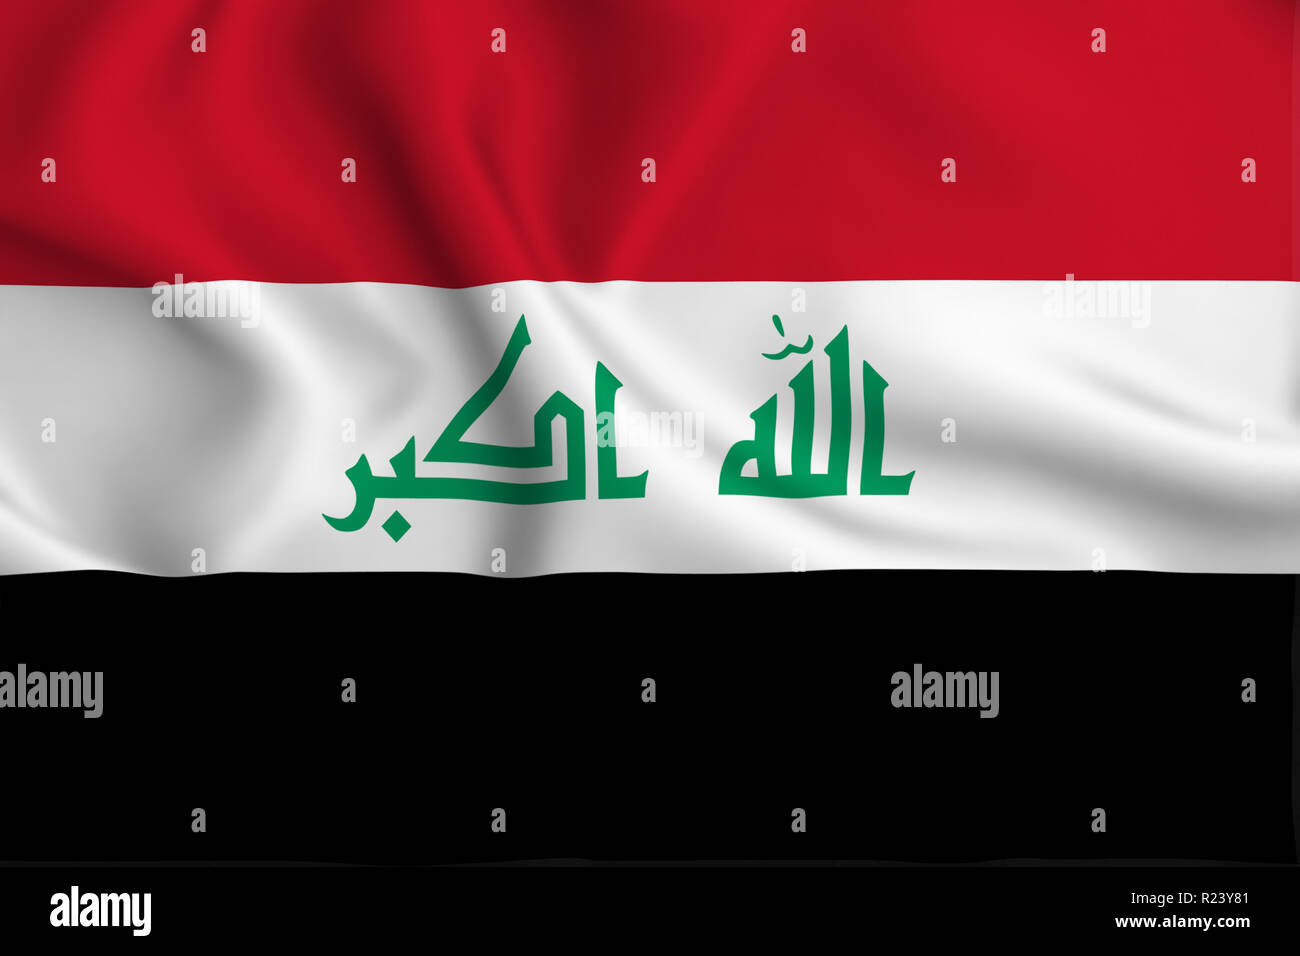 Iraq 3D waving flag illustration. Texture can be used as background. Stock Photo